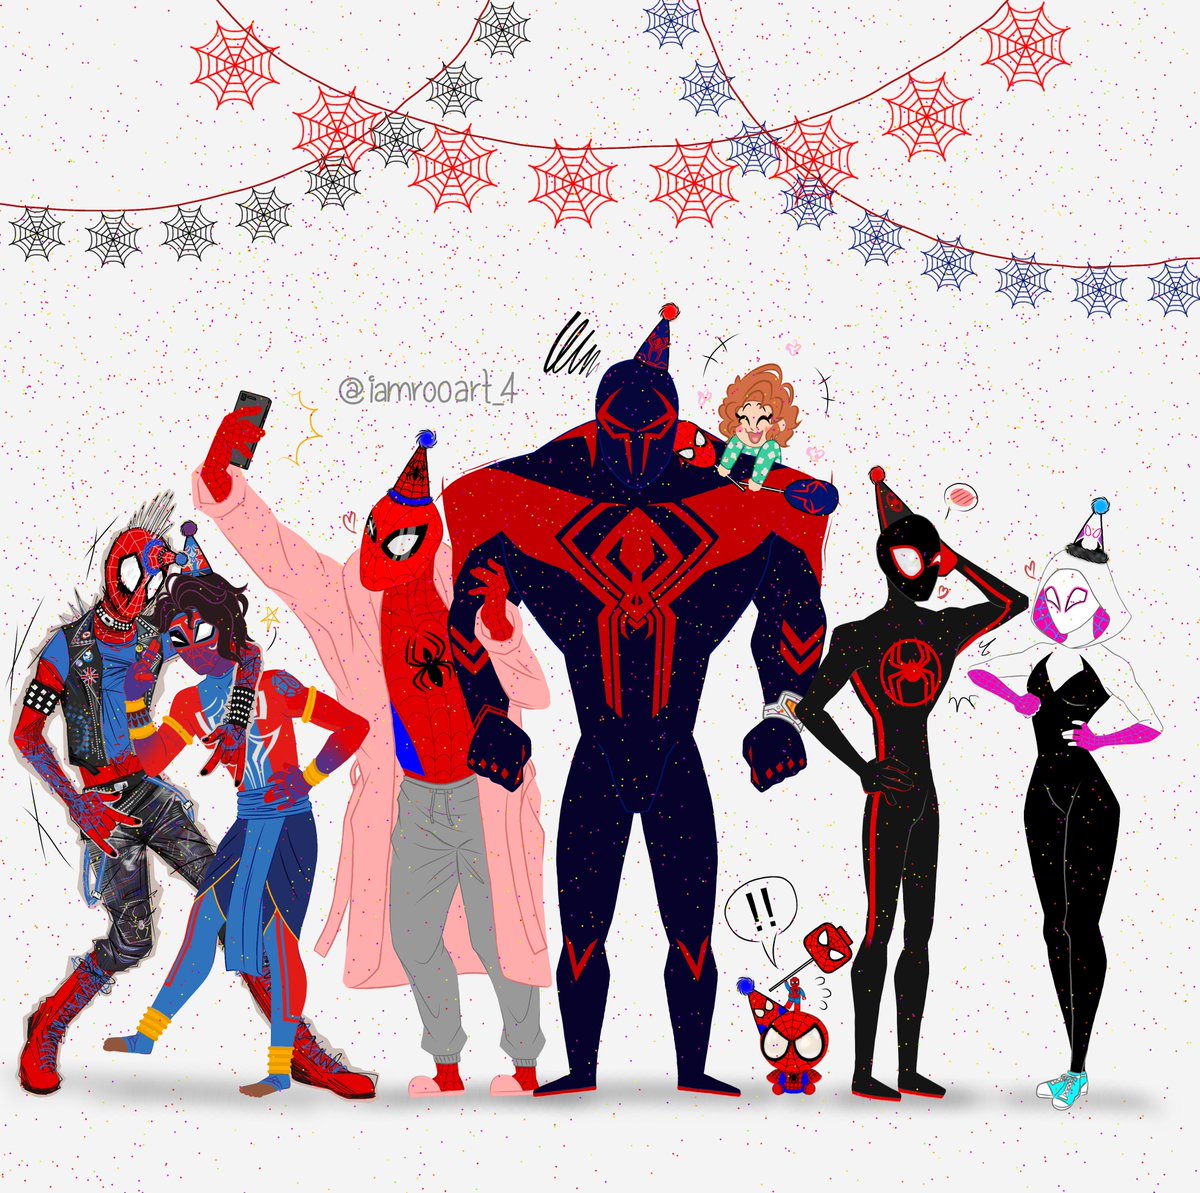 My plan was to post this on August 1st for Spider-Man Day, I ran into some issues and just finished, so let's assume today is August 1st. 
#AcrossTheSpiderVerse #SpiderManDay #SpuderDay #spiderdads